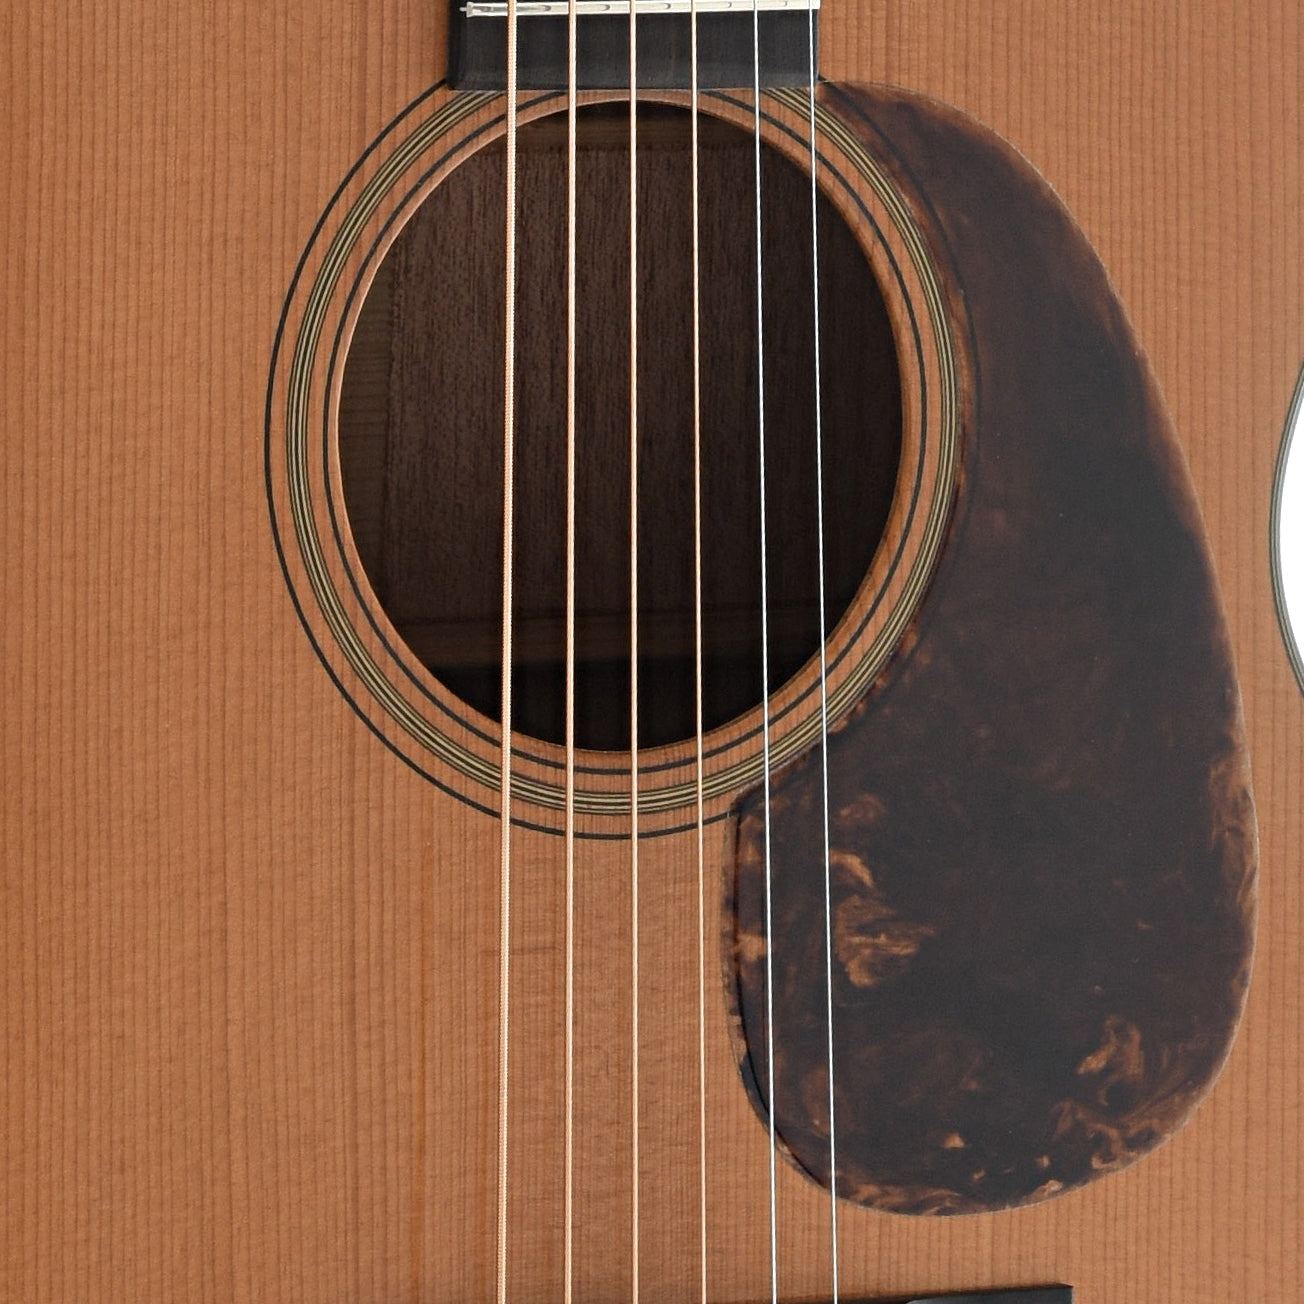 Image 4 of Pre-War Guitars Co. Triple-O Mahogany, Level 1 Aging - SKU# PW000M : Product Type Flat-top Guitars : Elderly Instruments